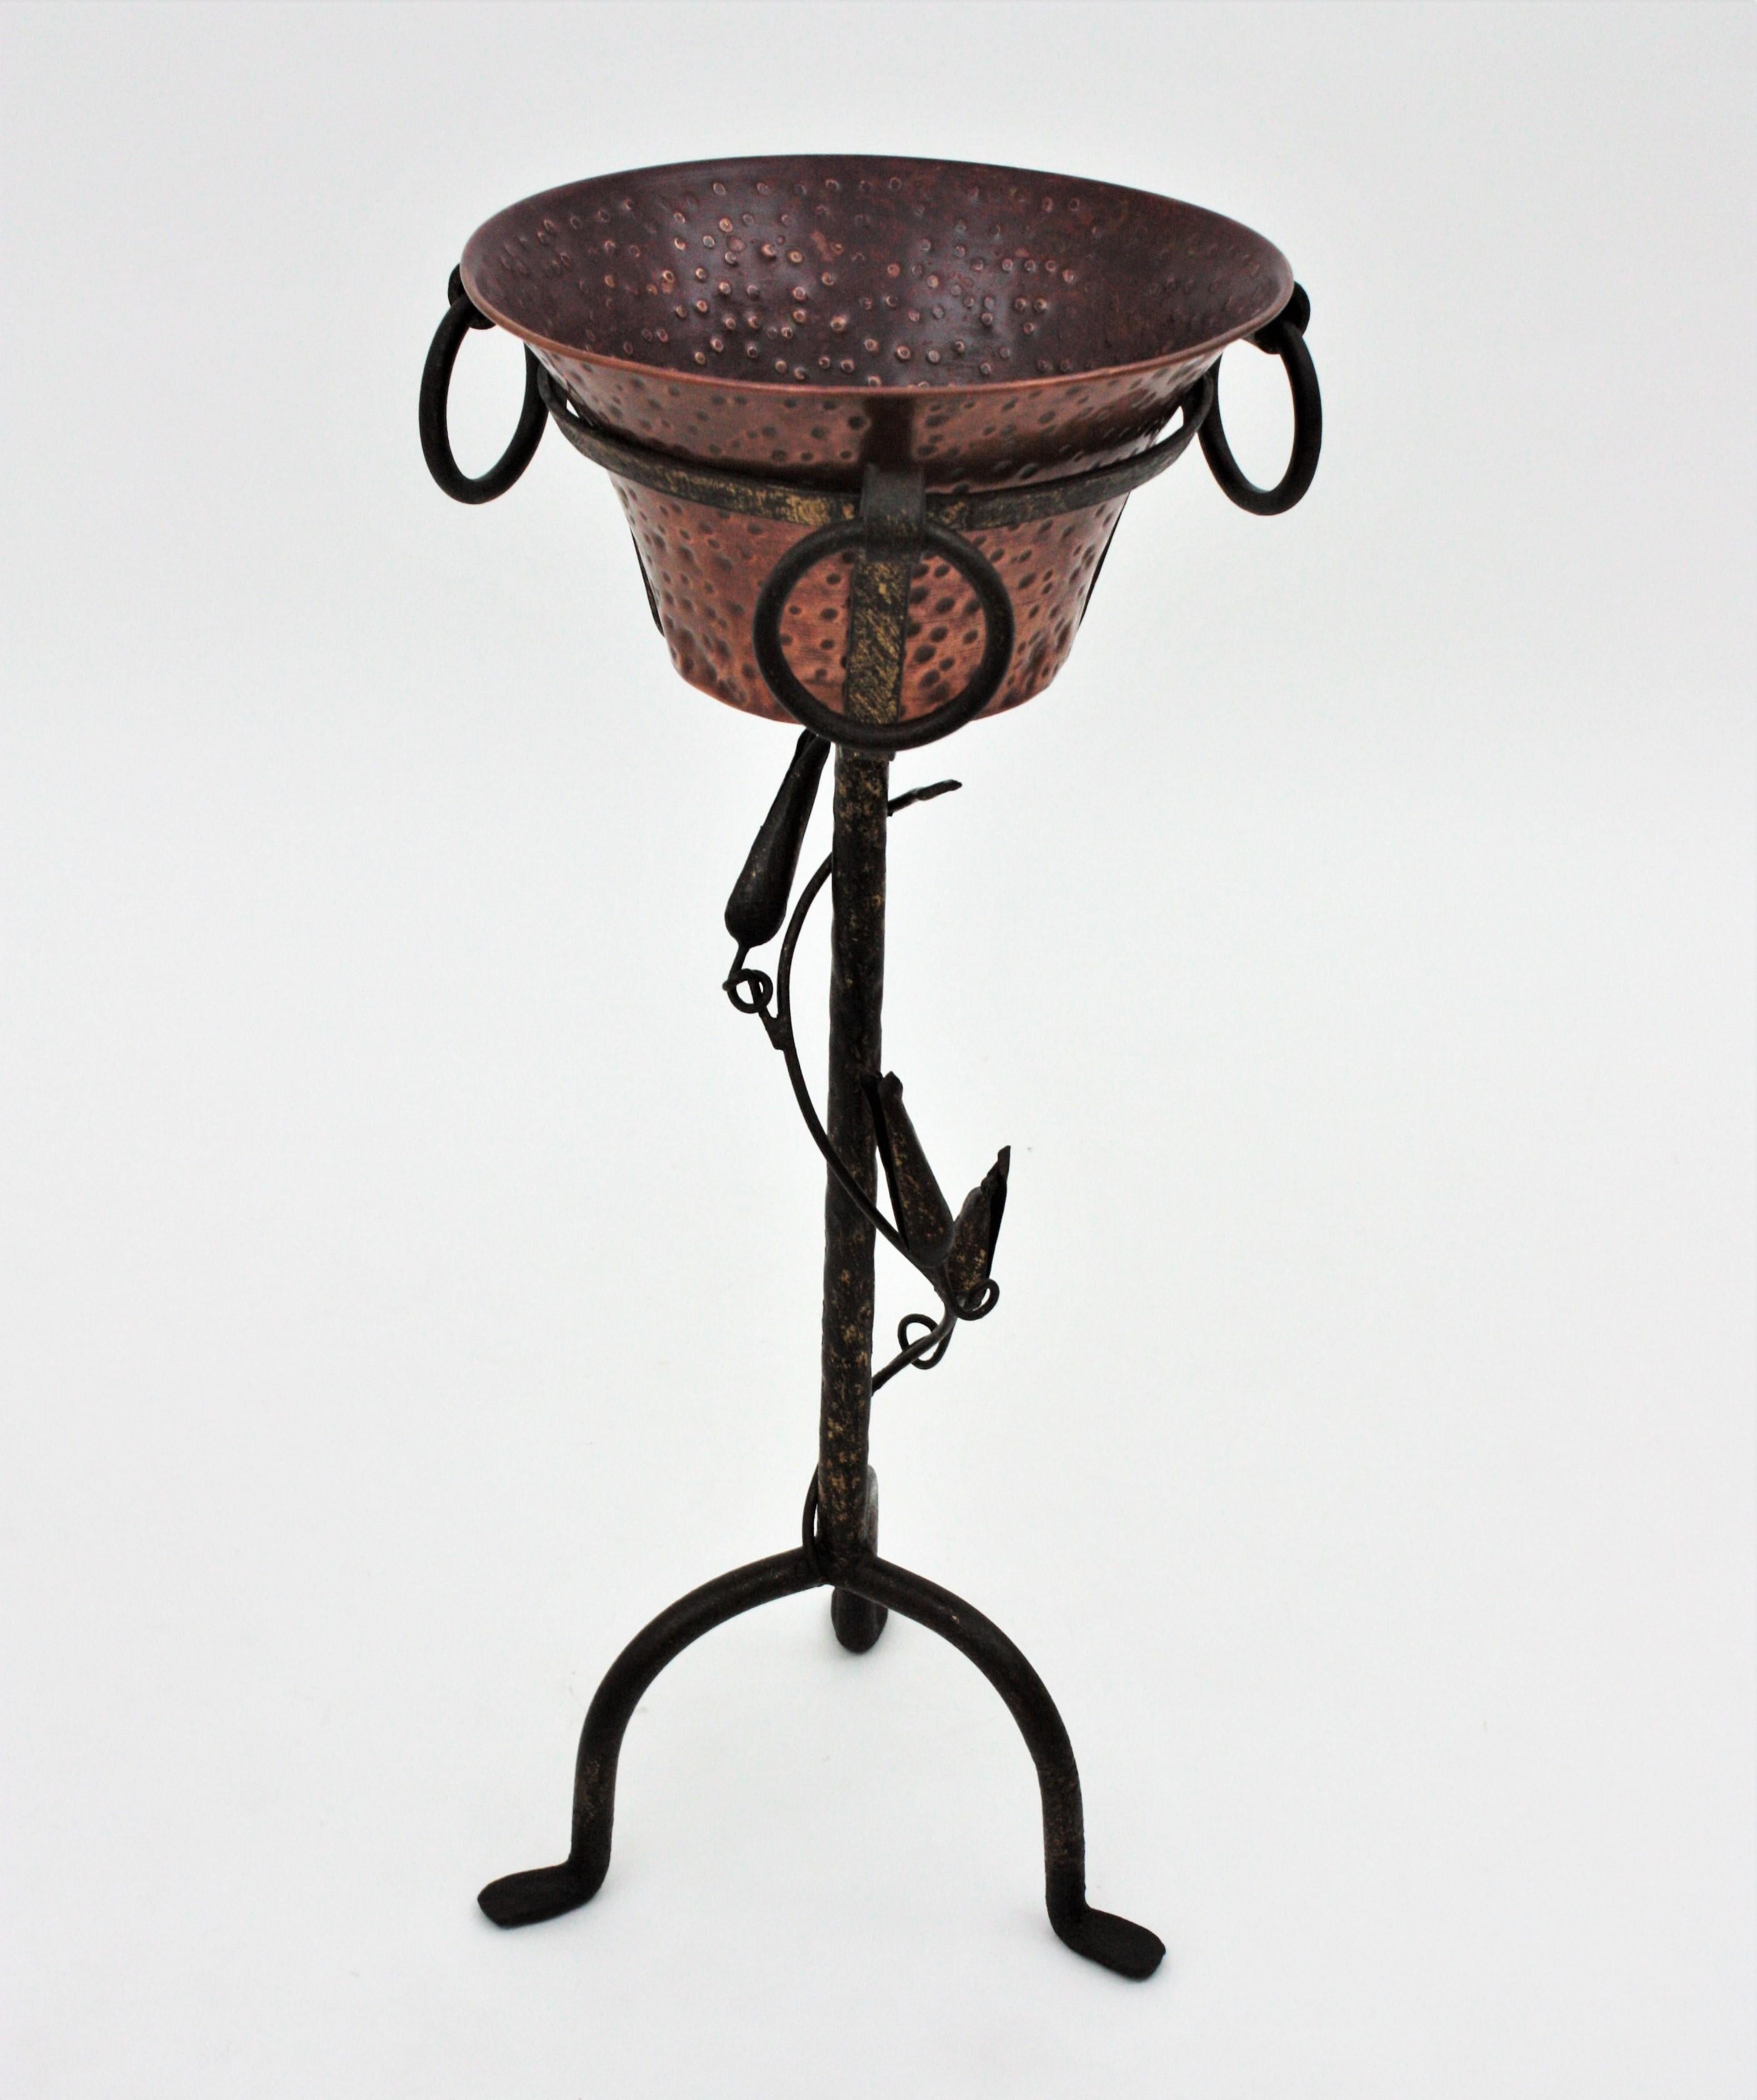 20th Century Champagne or Wine Cooler Stand Serving Bucket in Hand Forged Iron and Copper